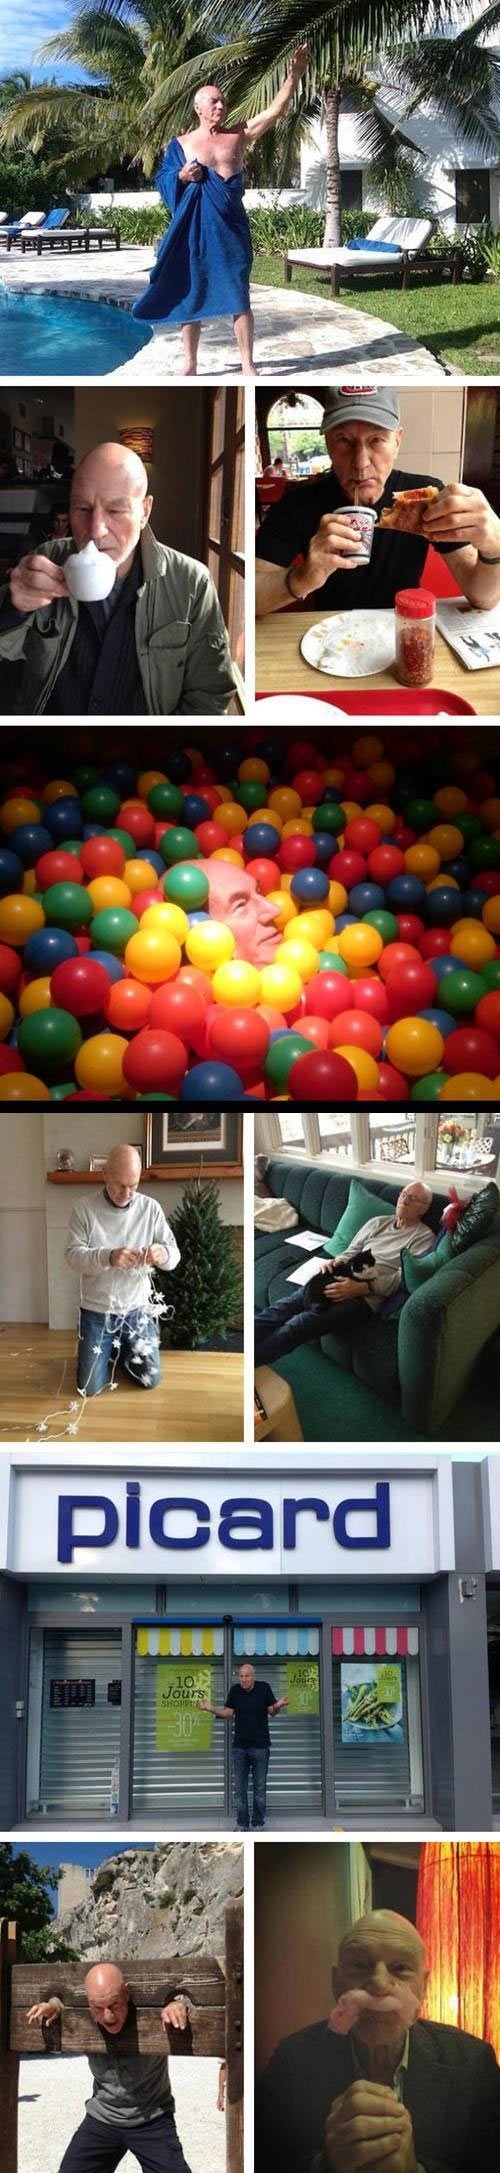 Just Patrick Stewart being awesome